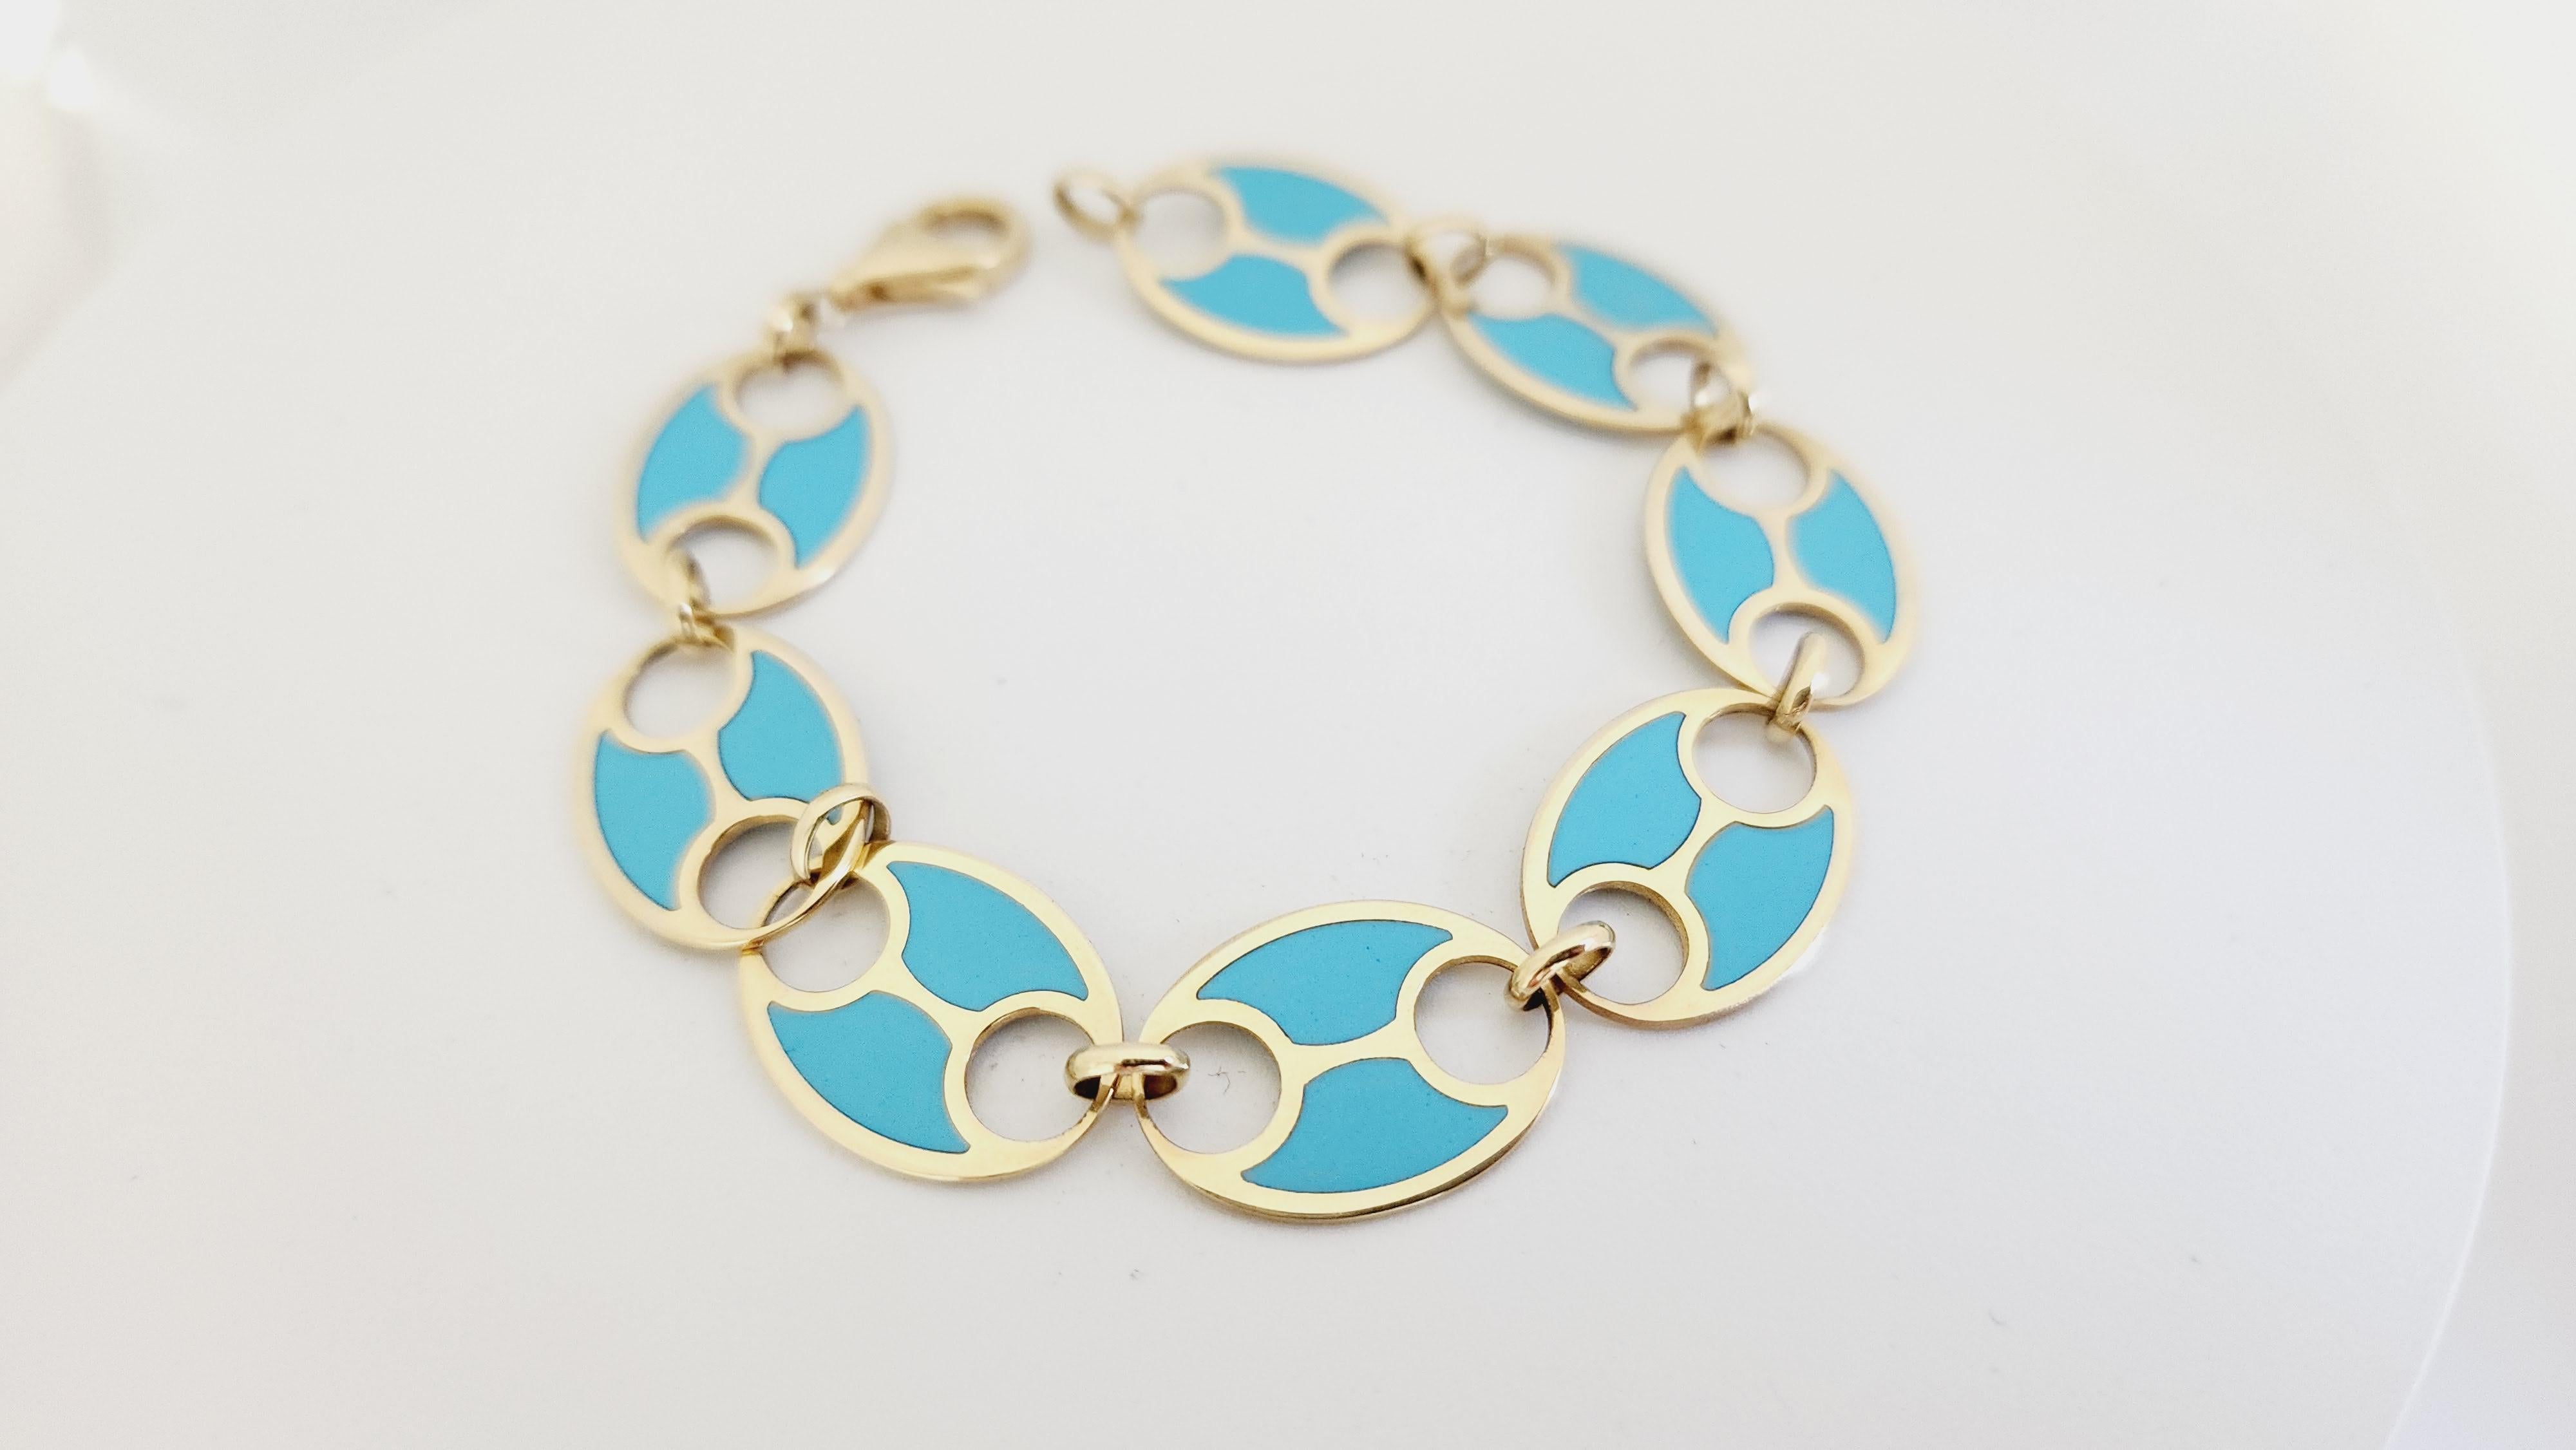 Turquoise Yellow Gold Link Bracelet, Lobster closure. Length is 7 inches.